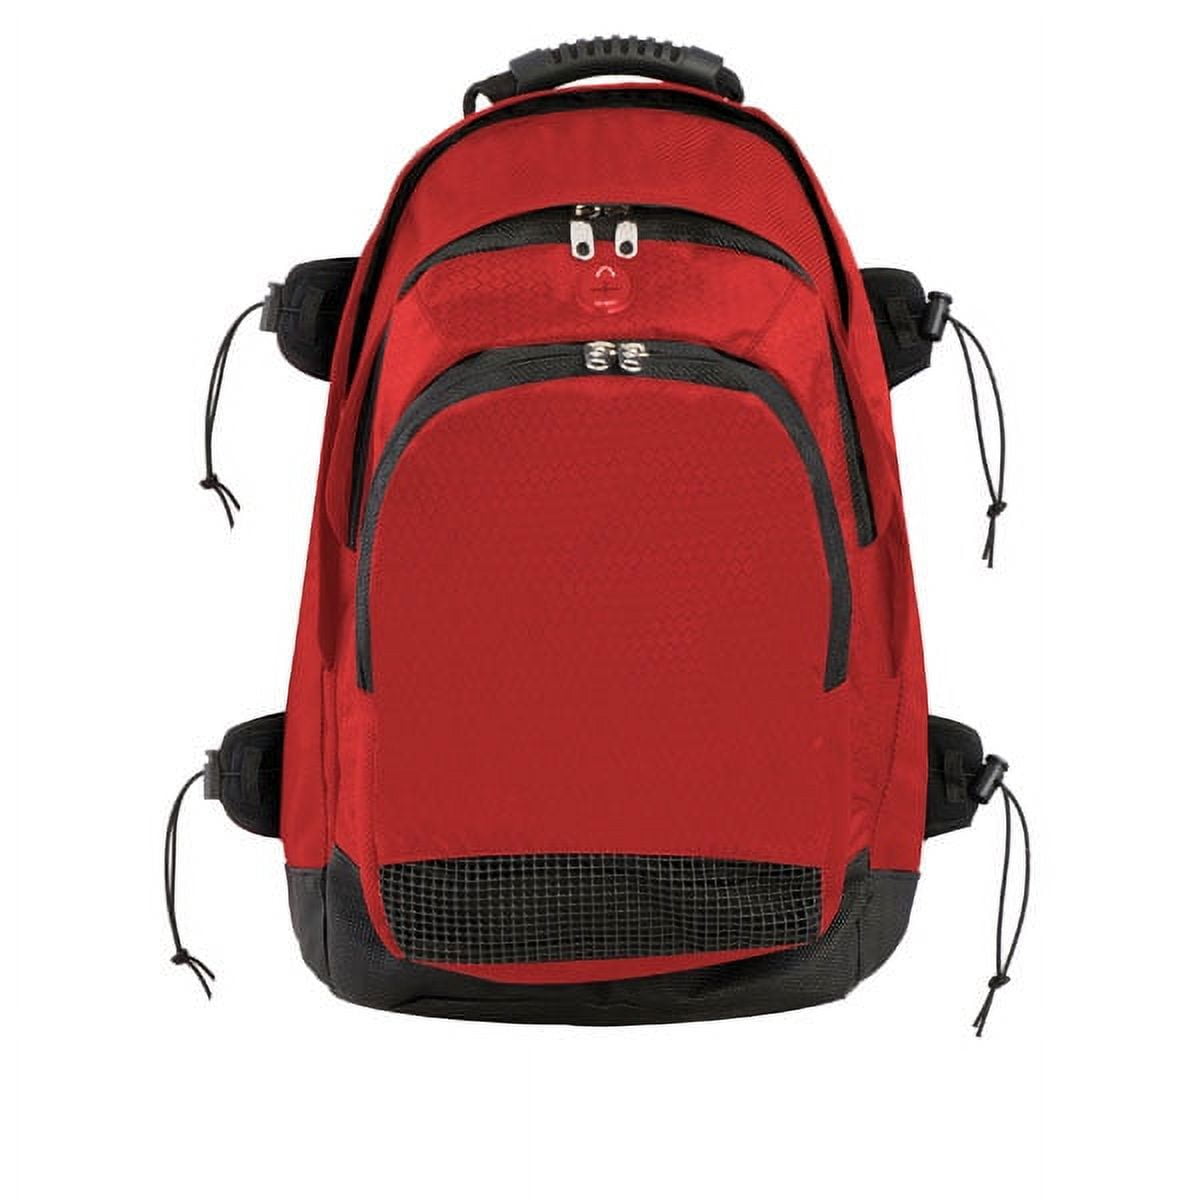 Bp802rd 13 X 20 X 10 In. Deluxe All Purpose Backpack, Red